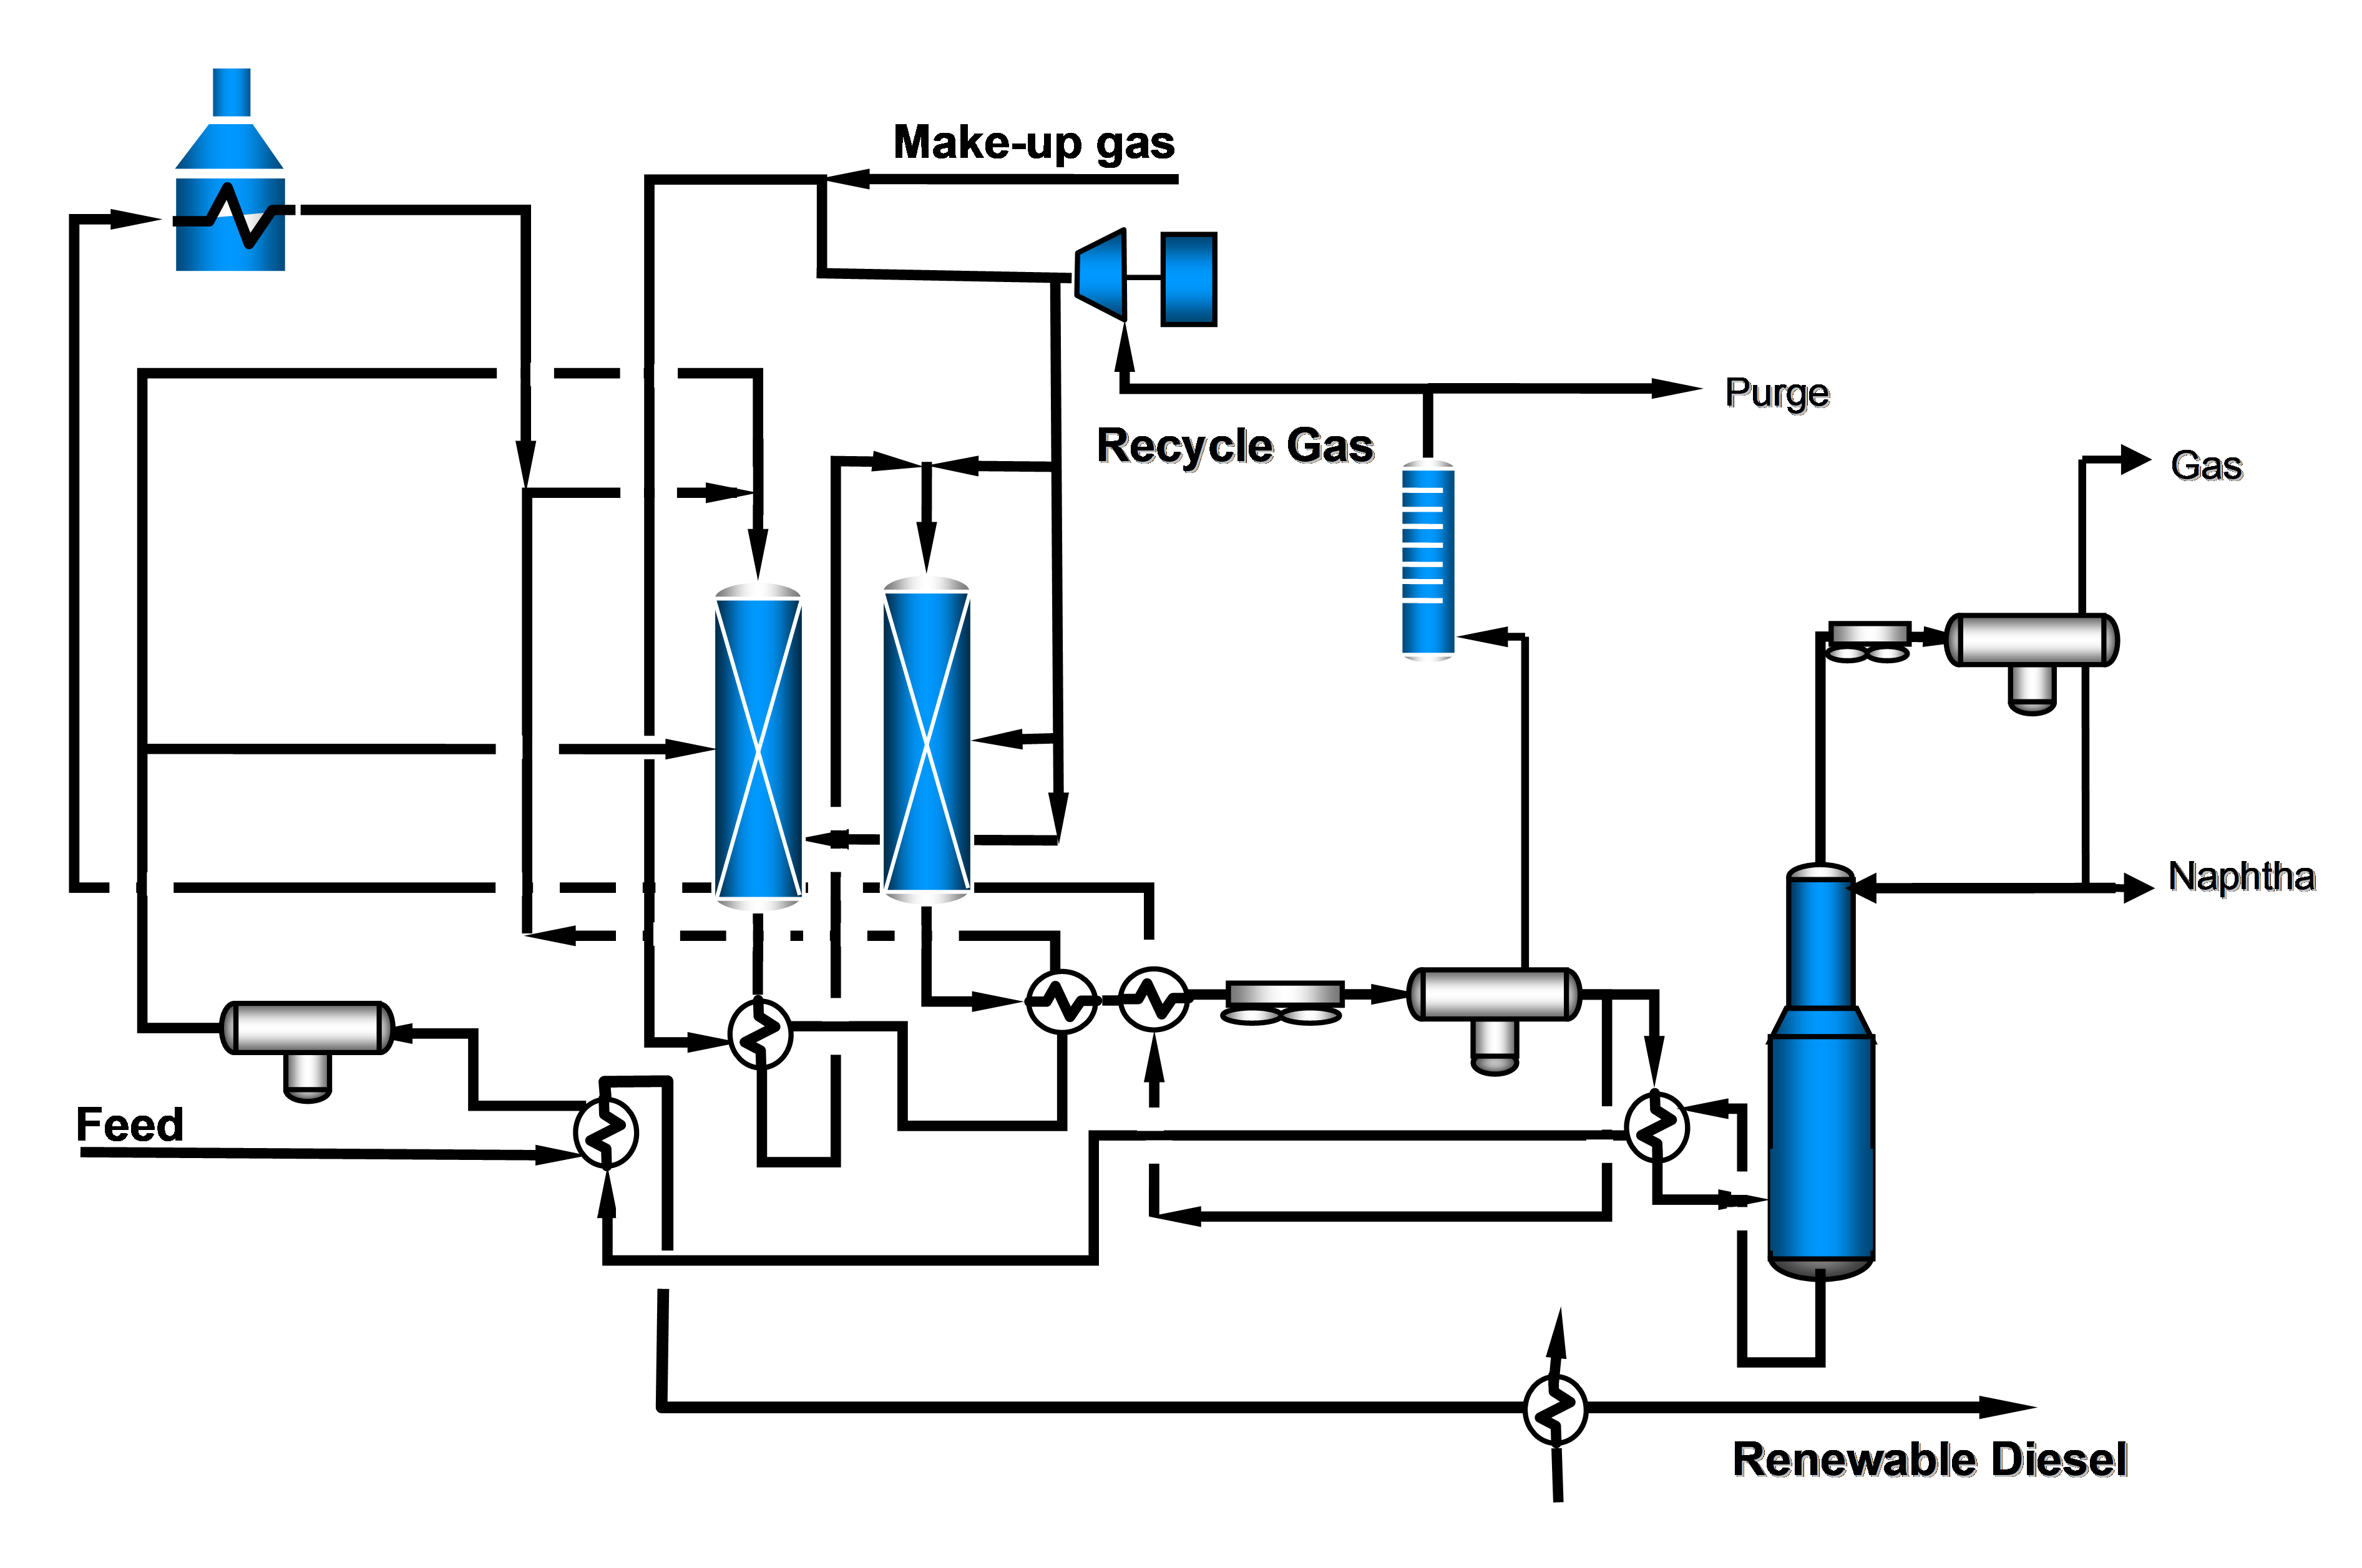 KP Engineering's process flow diagram (PFD) for a renewable diesel unit in Southwest United States.